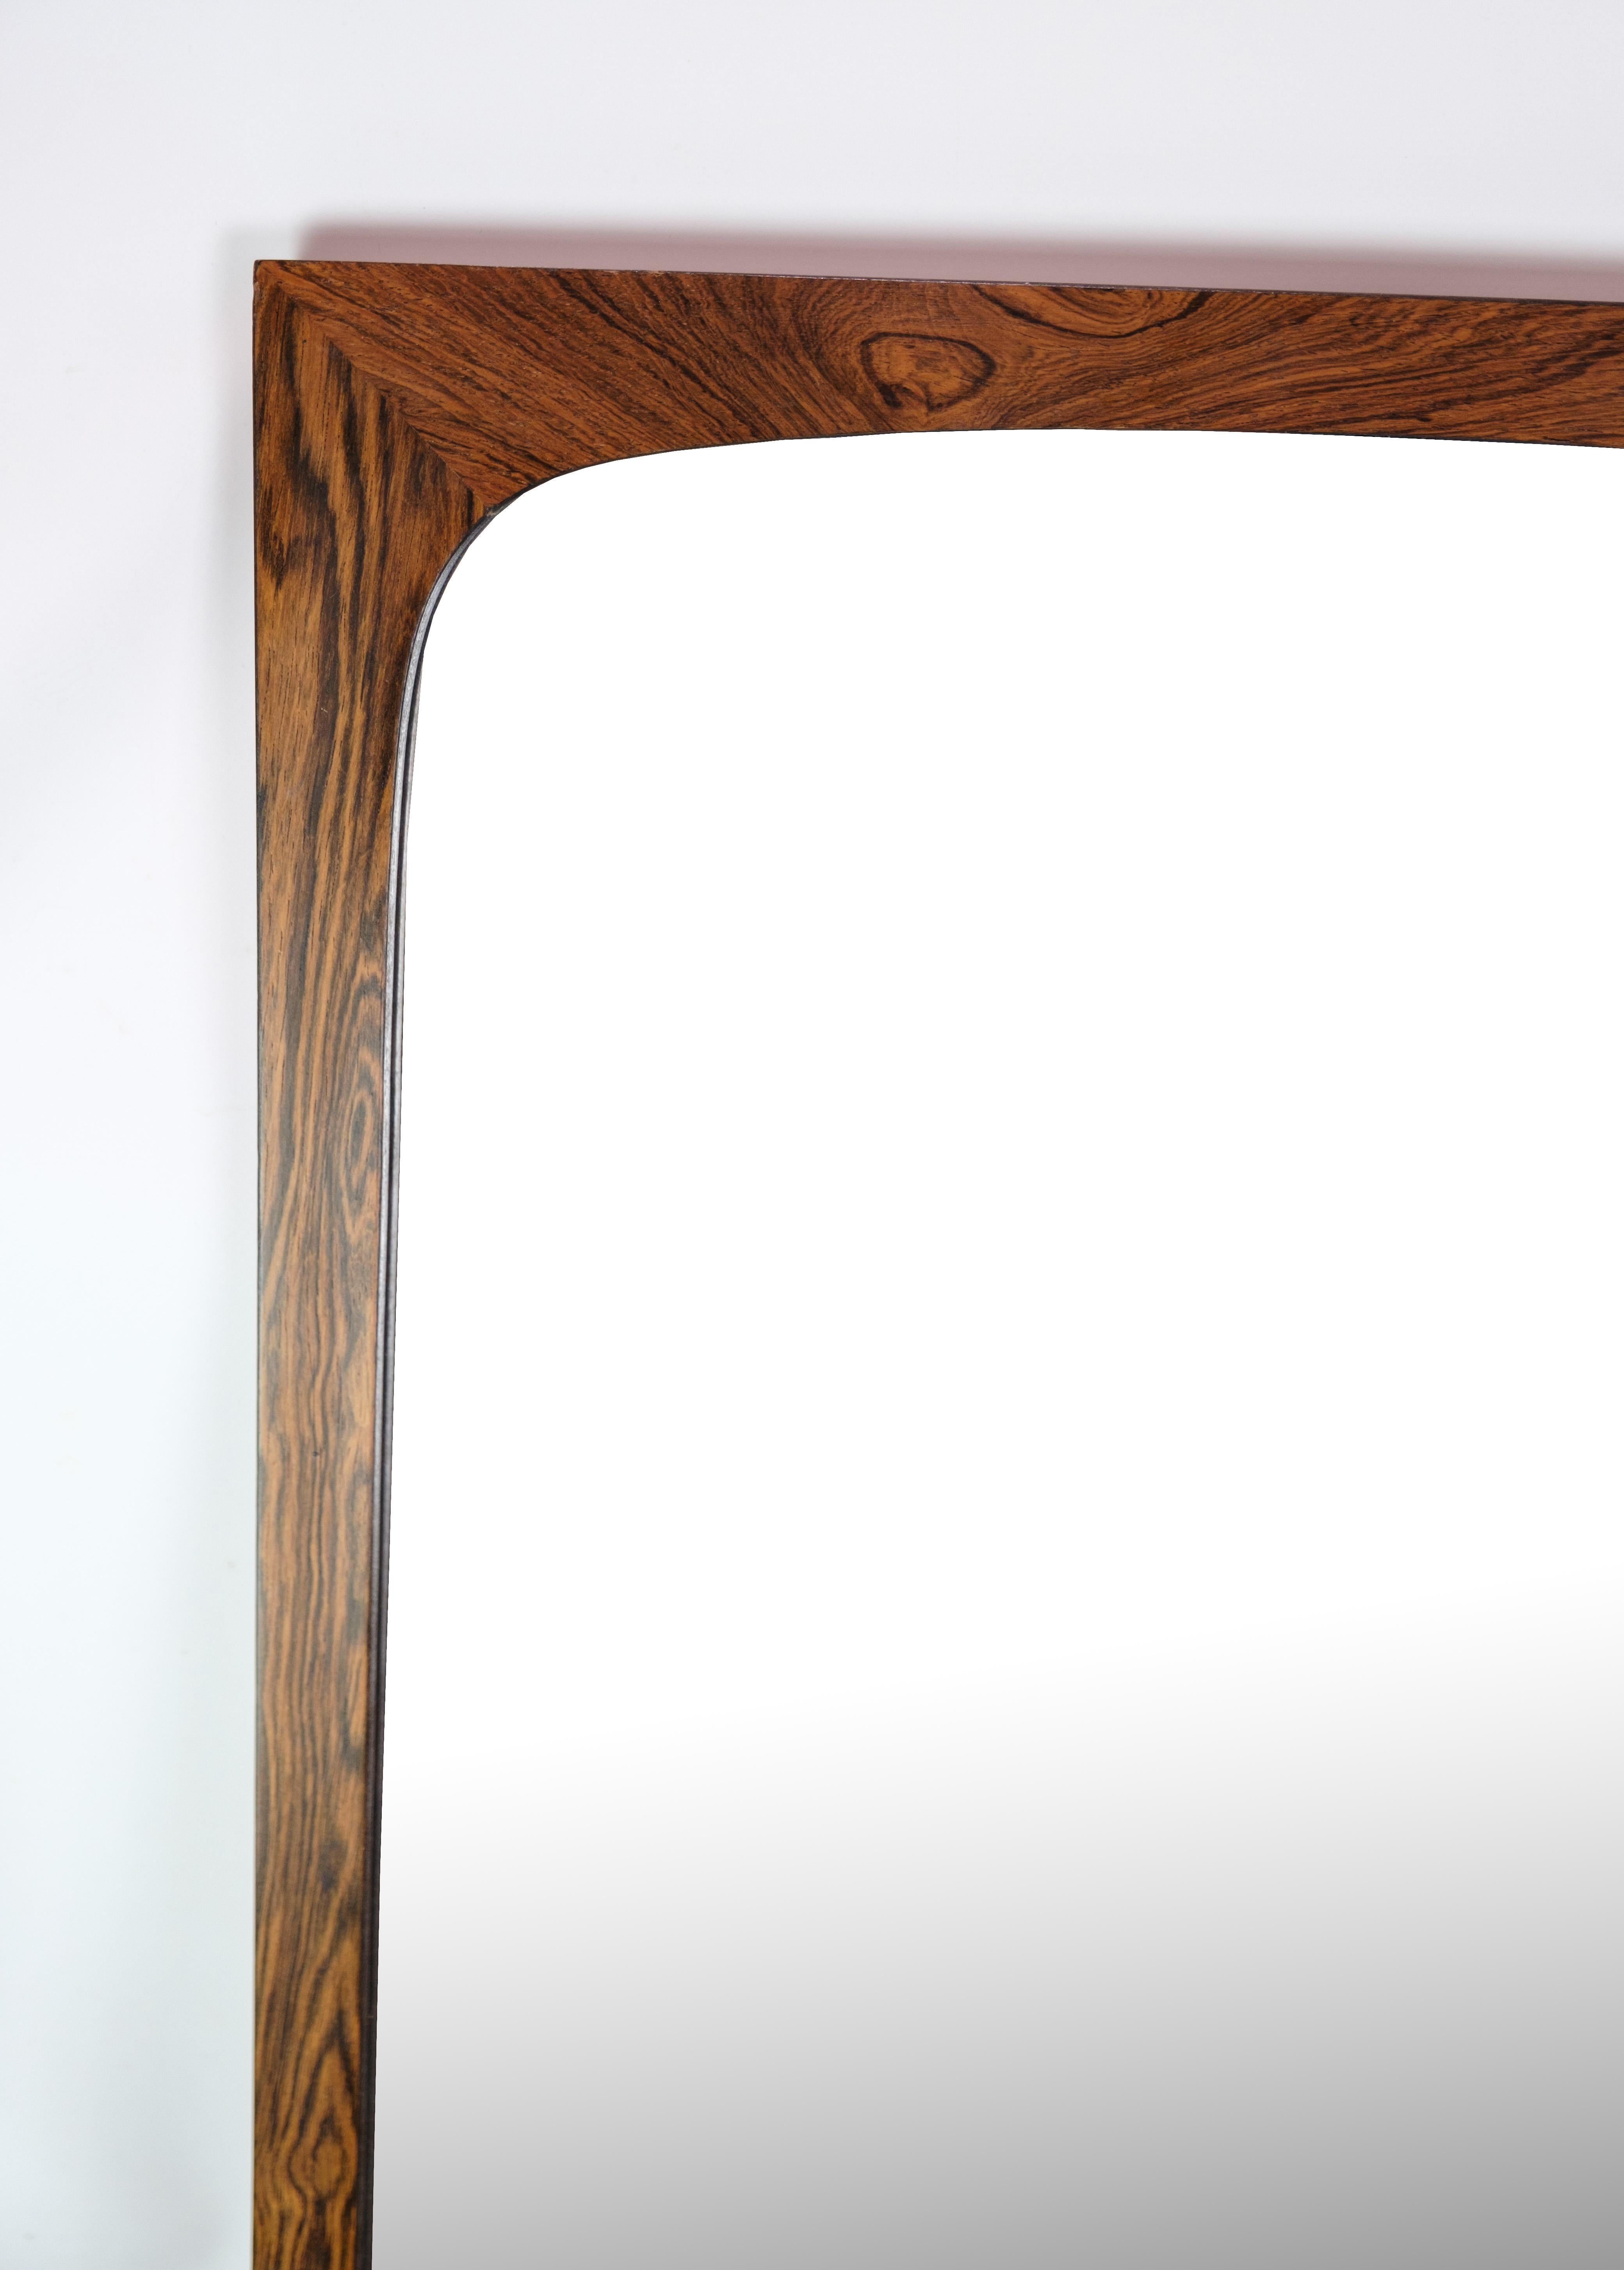 Mirror Made In Rosewood, Danish Design From 1960s In Good Condition For Sale In Lejre, DK